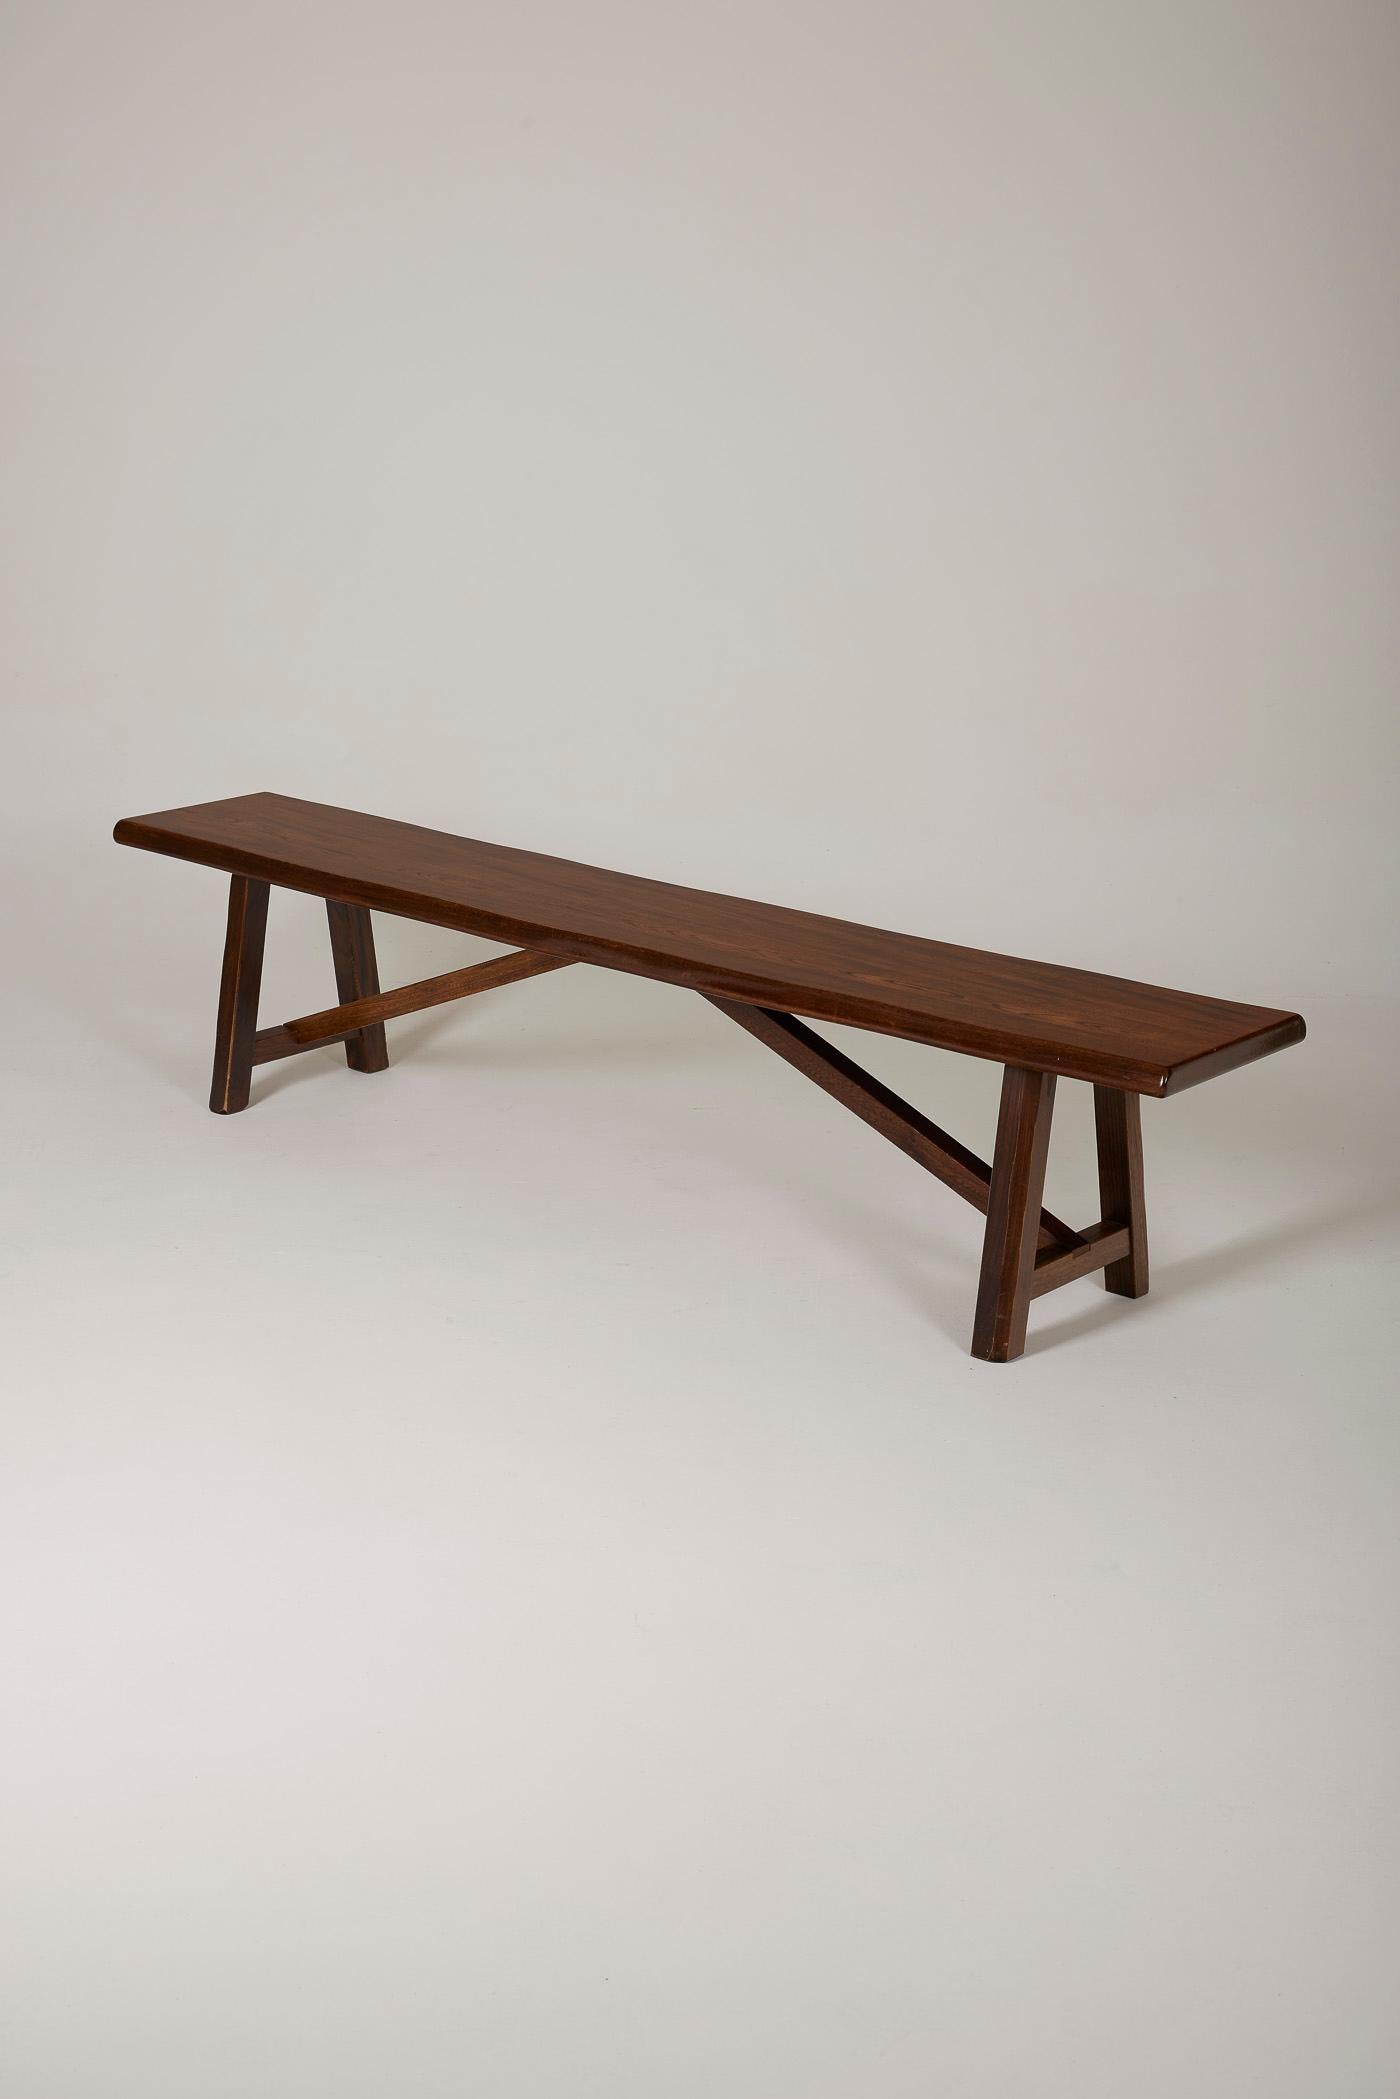 Aranjou solid wood bench often attributed to designer Olavi Hanninen, 1940s. Perfect condition.
LP1679